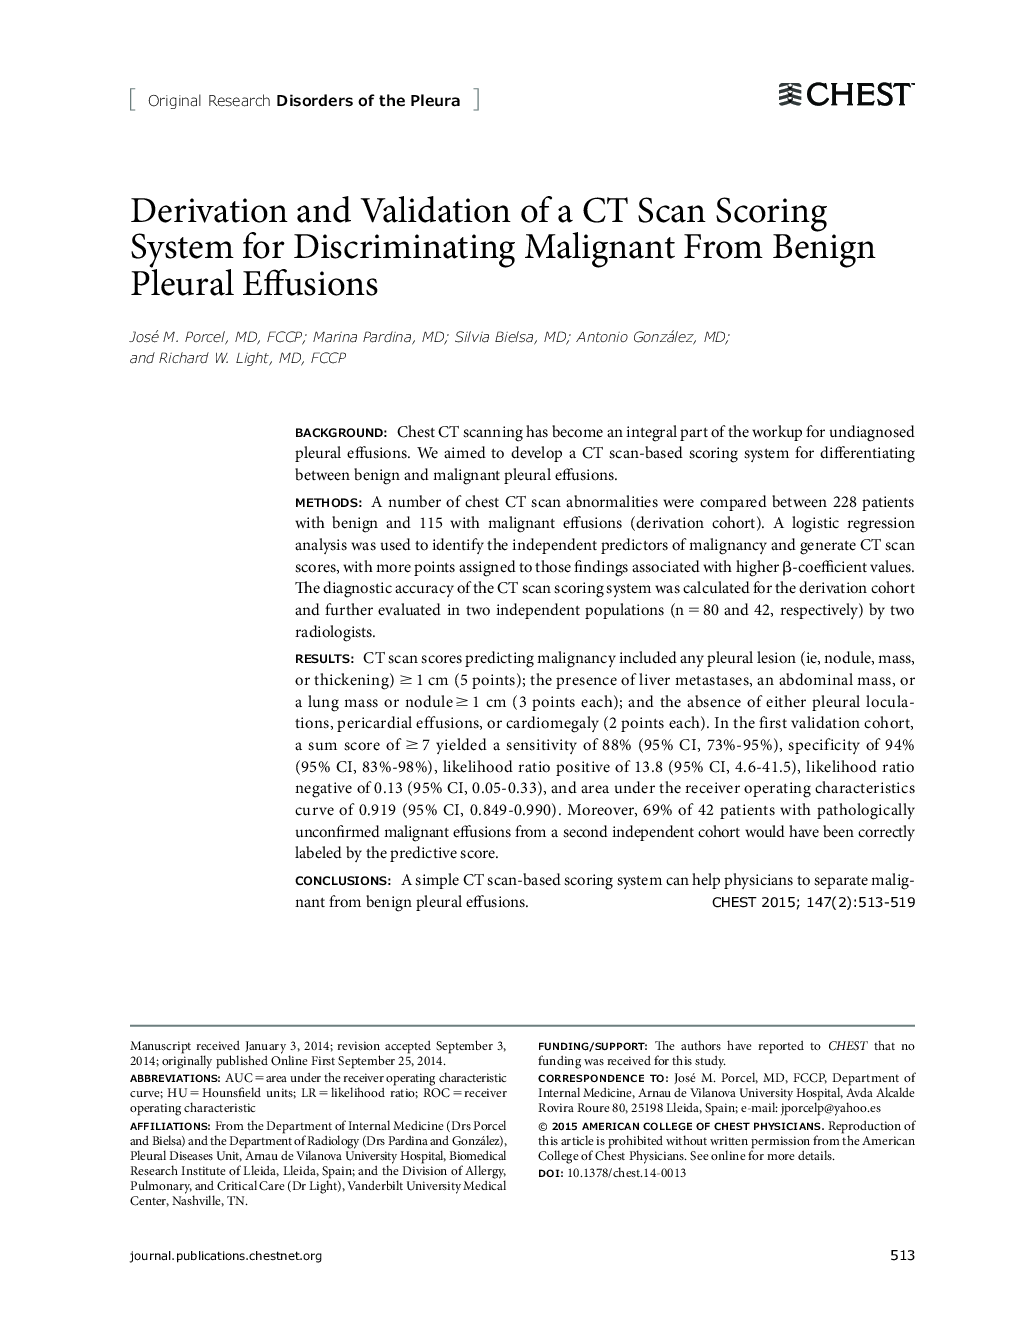 Original Research: Disorders of the PleuraDerivation and Validation of a CT Scan Scoring System for Discriminating Malignant From Benign Pleural Effusions